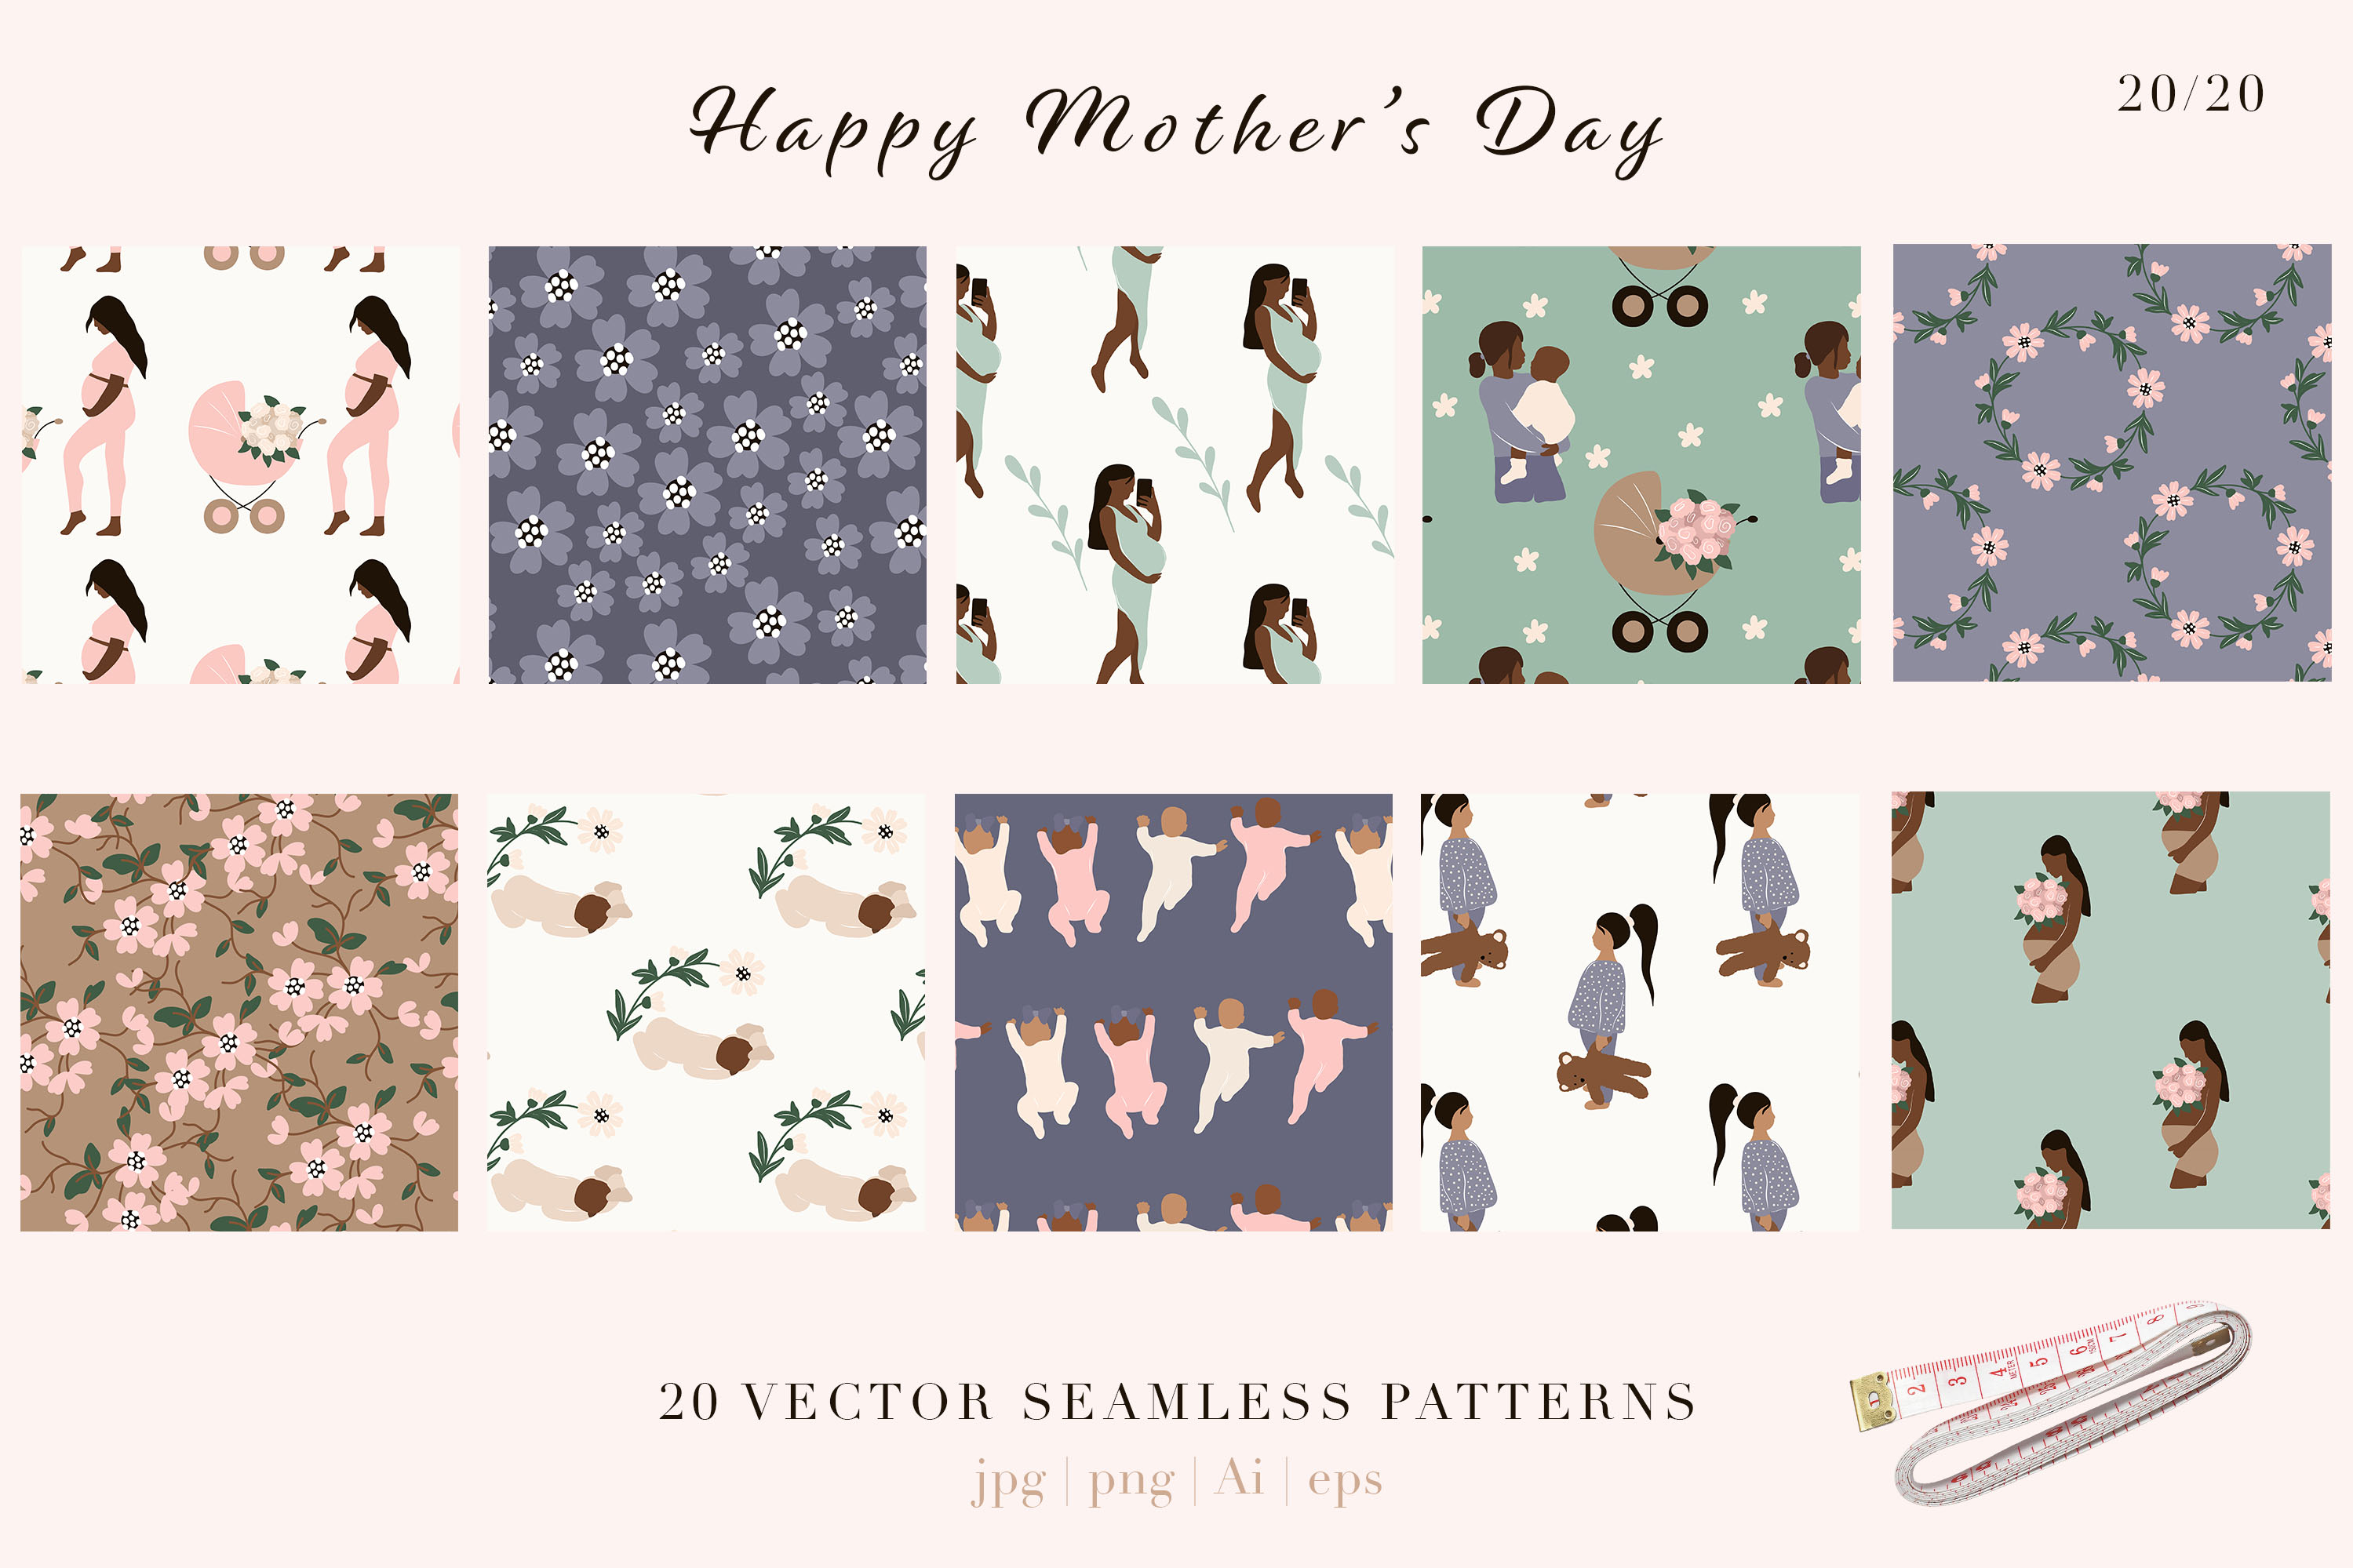 Mothers Day saemless patterns.